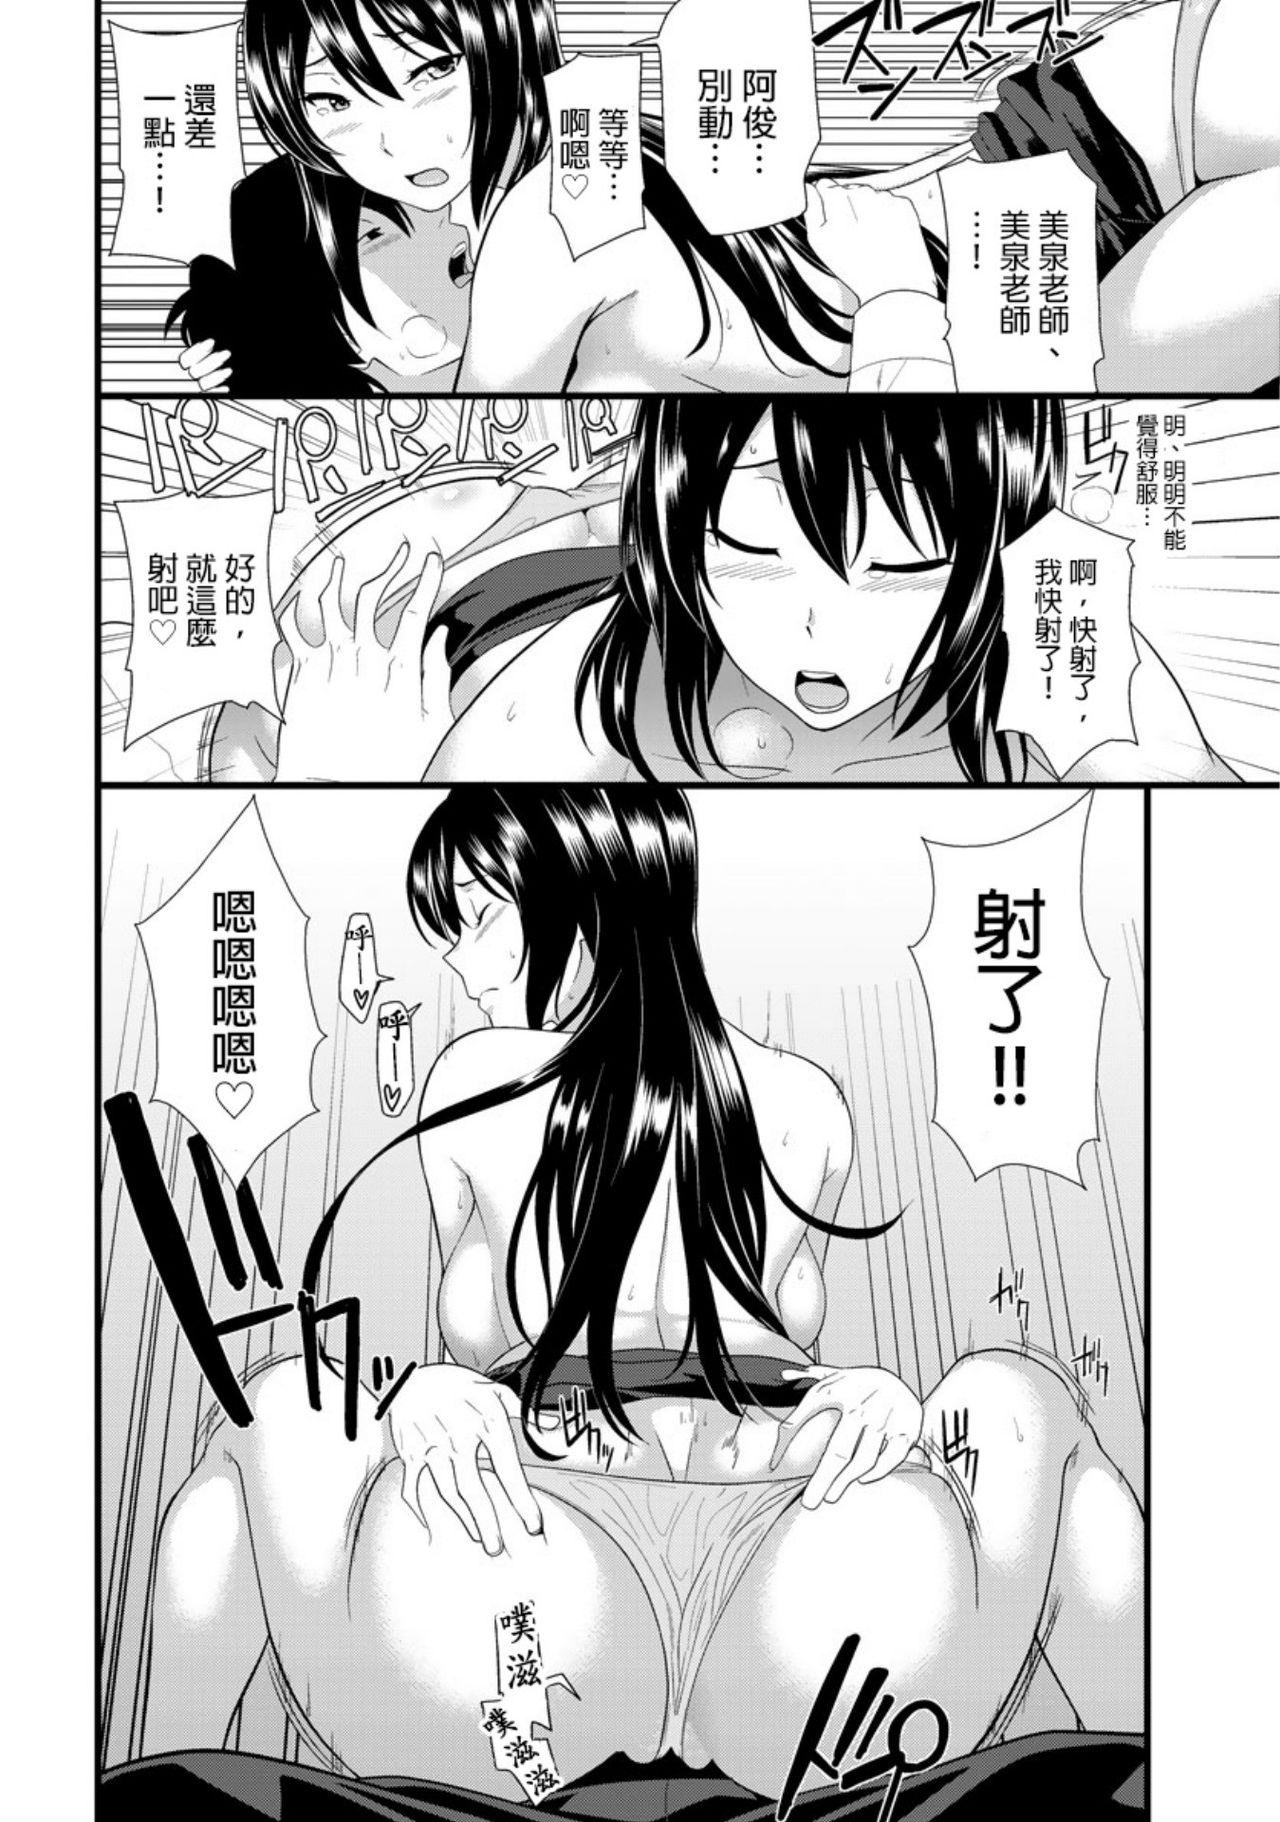 Class 教え子に襲ワレル人妻は抵抗できなくて Ch.2 Amateur Sex - Page 11